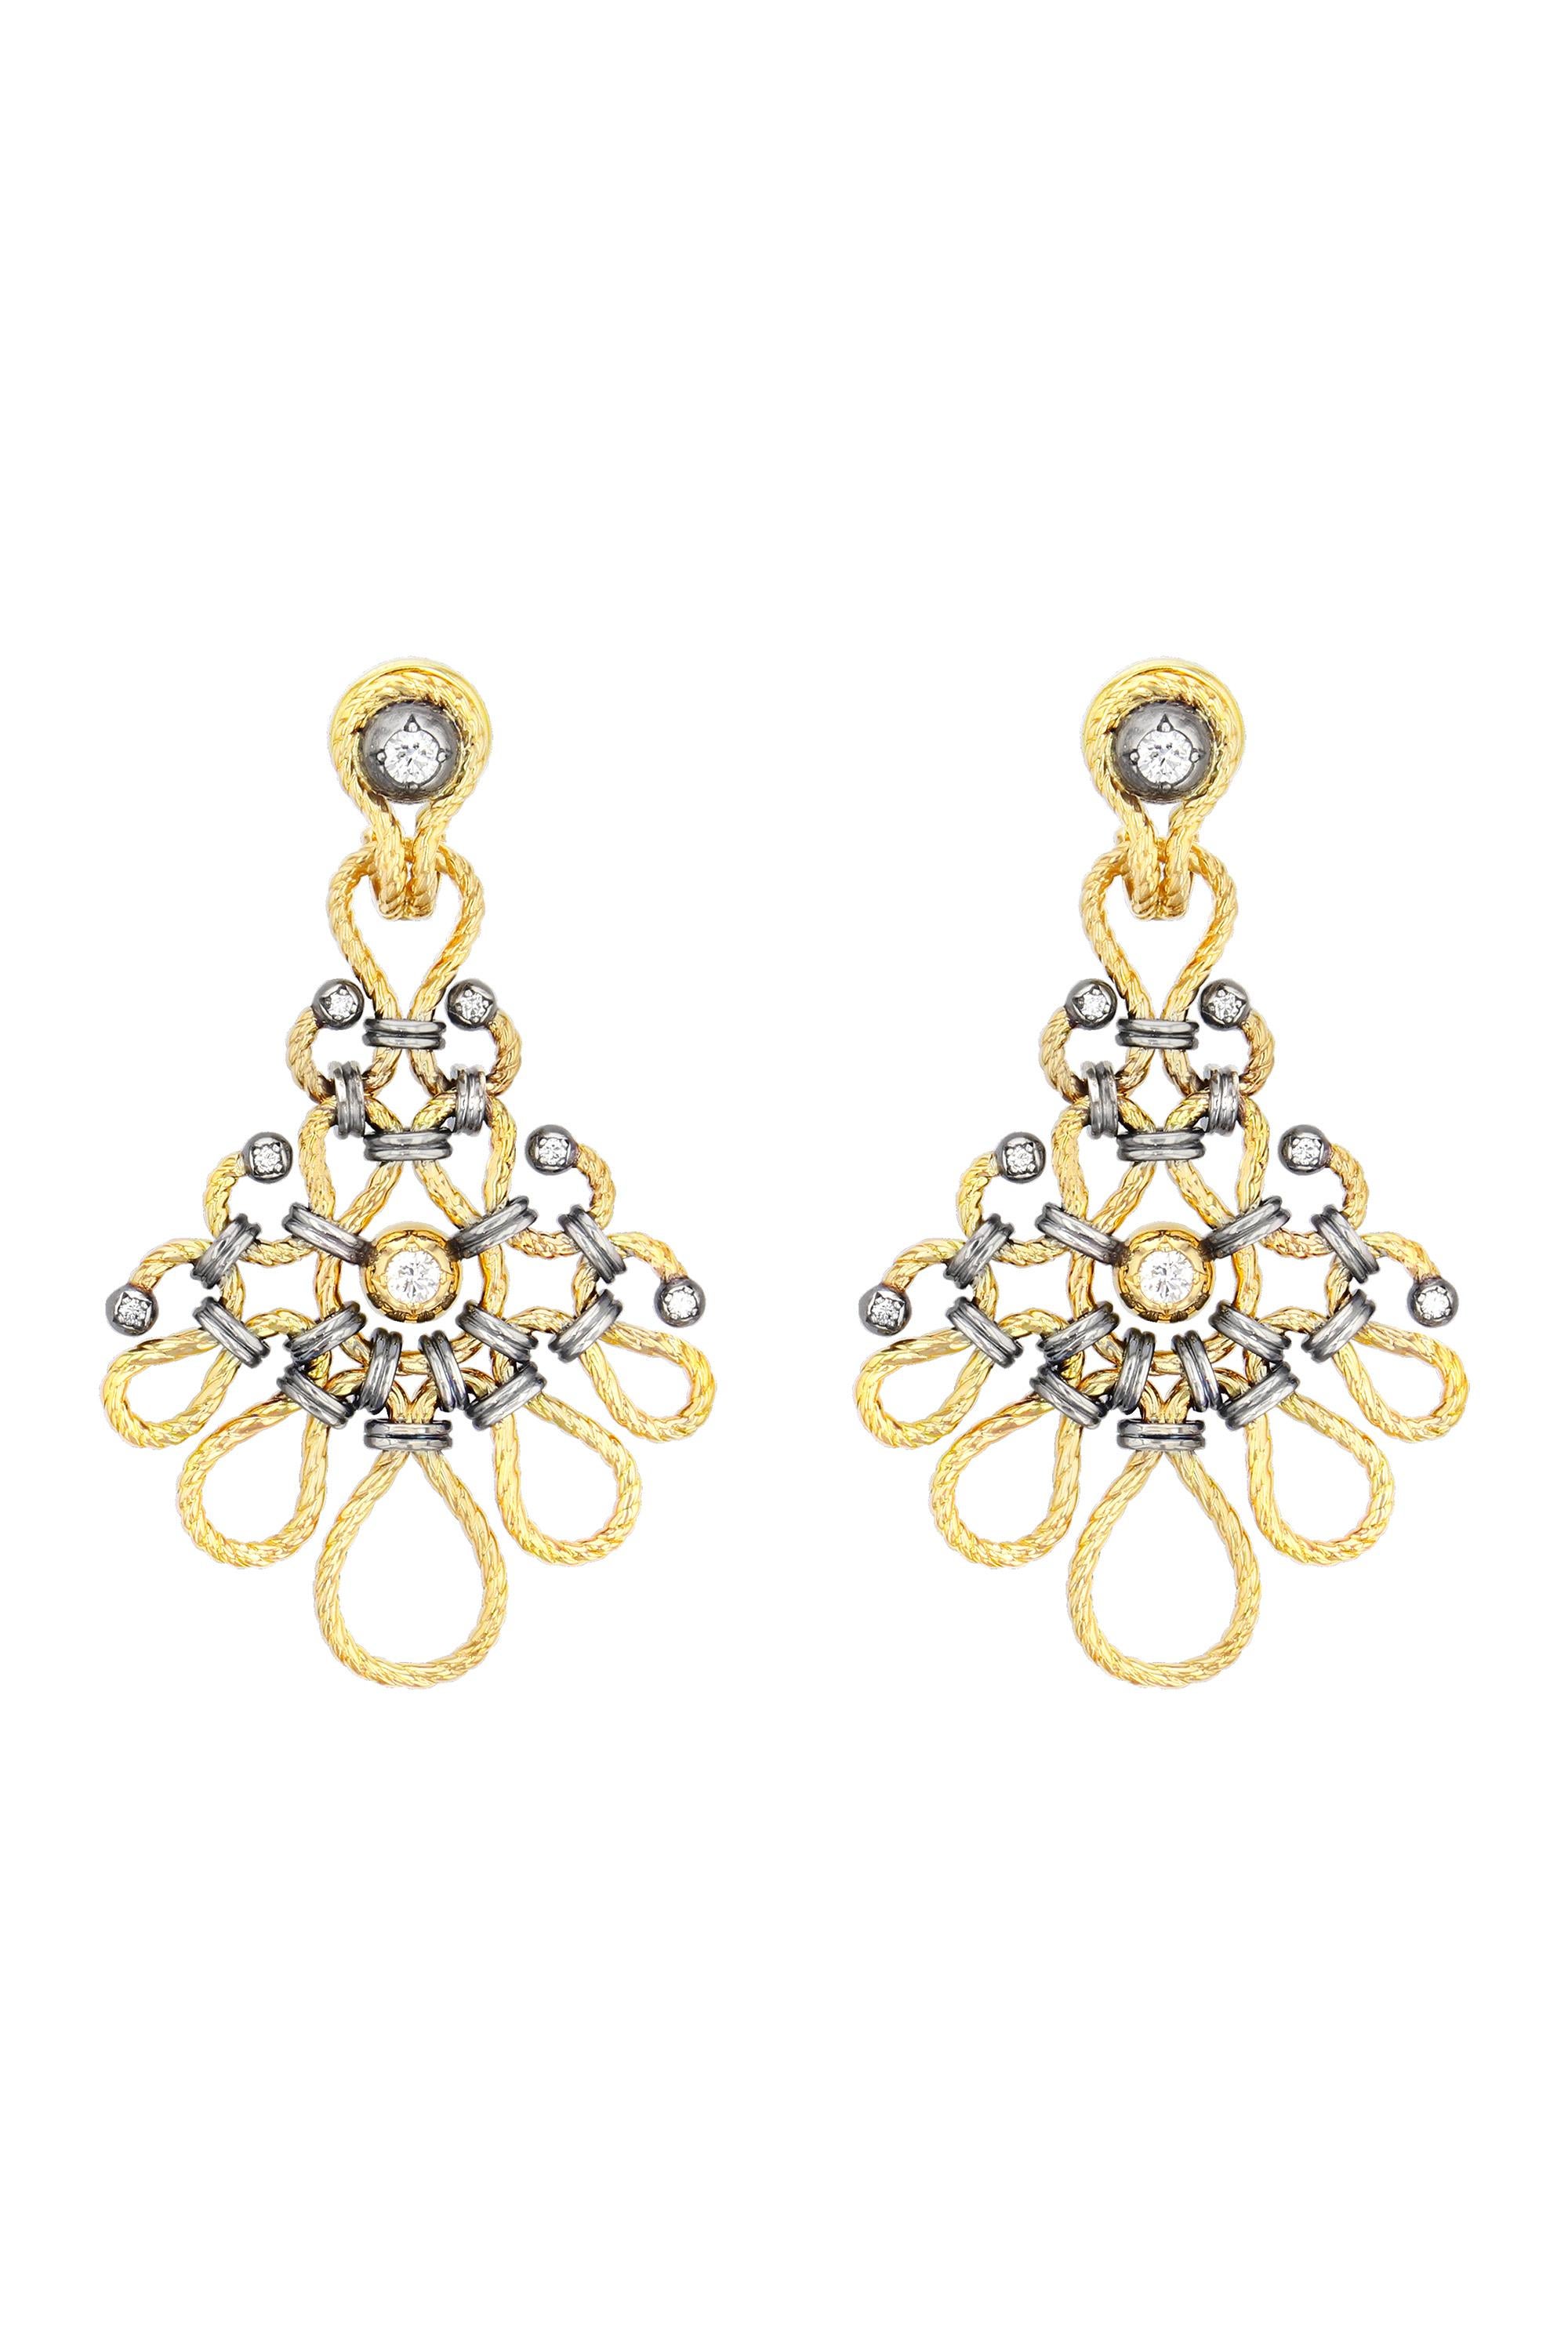 Earrings, serpentine twists in yellow gold punctuated with gold and silver balls set with a diamond held by a set of distressed silver rings.

Details:
GVS Diamonds: 0.76 cts
18k Yellow Gold : 27 g
925 Distressed Silver : 8 g
Made in France